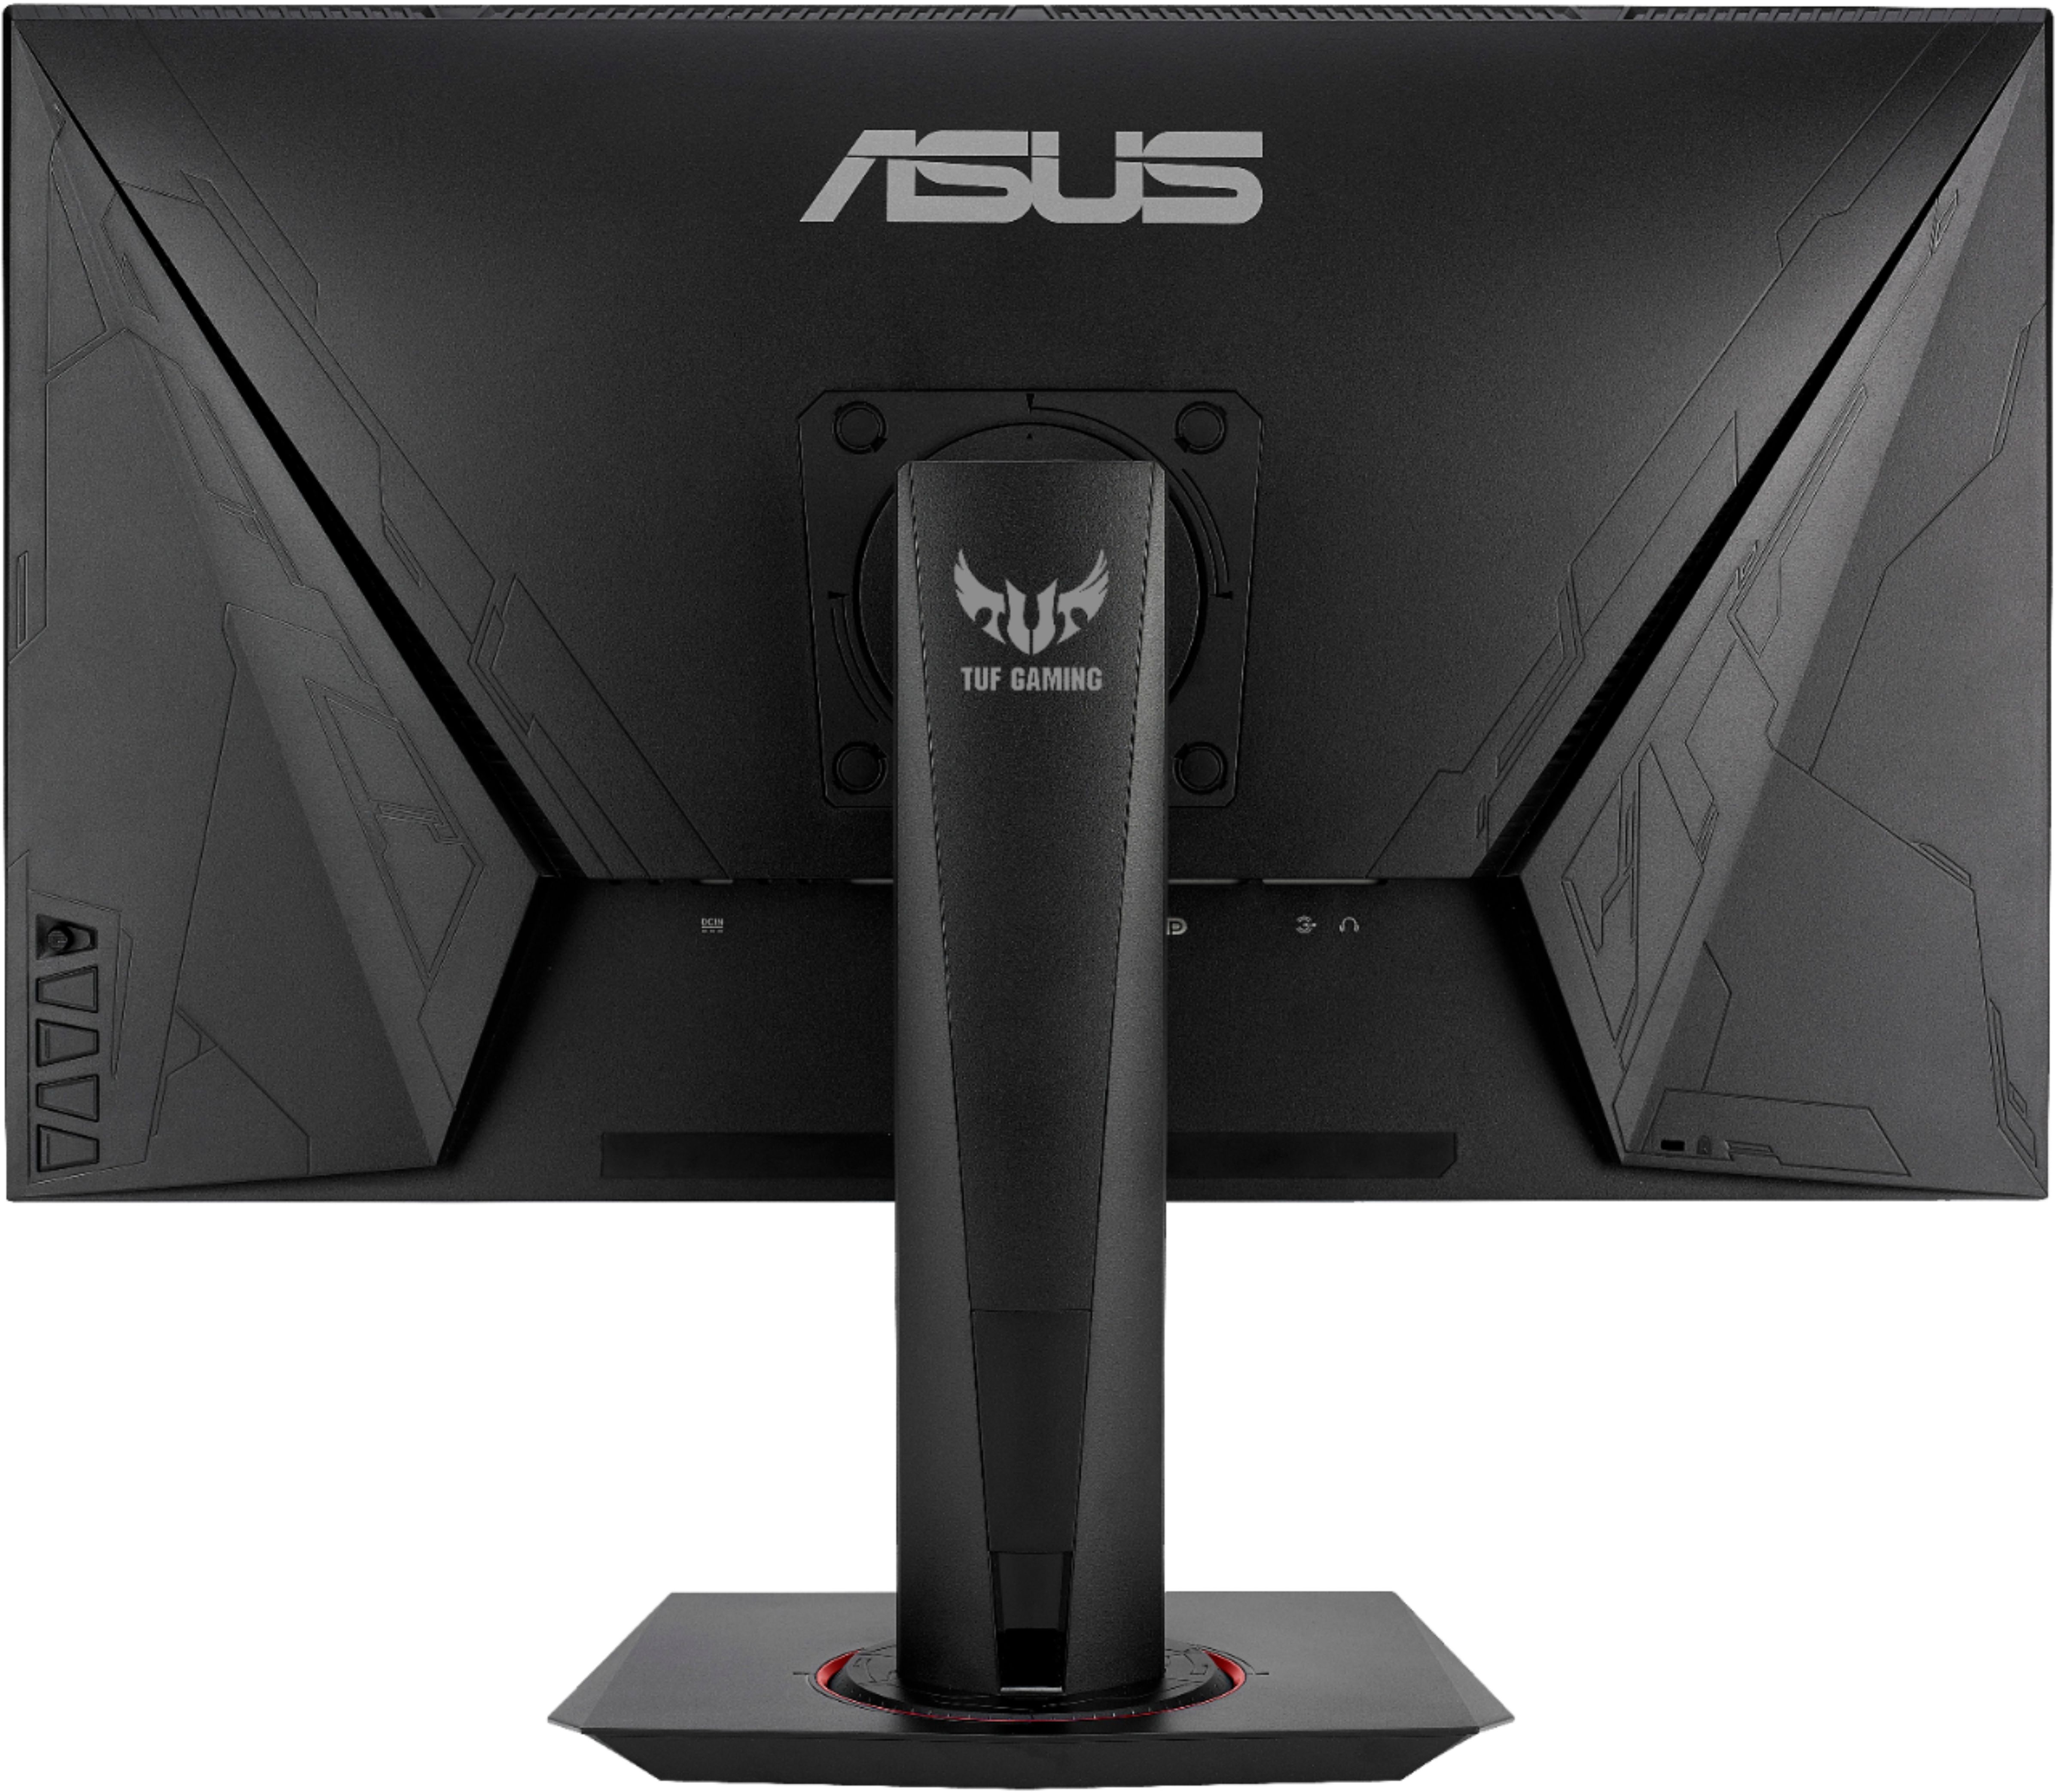 ASUS TUF Gaming 27” LED Gaming Monitor, 1080P Full HD, 165Hz (Supports  144Hz), IPS, 1ms